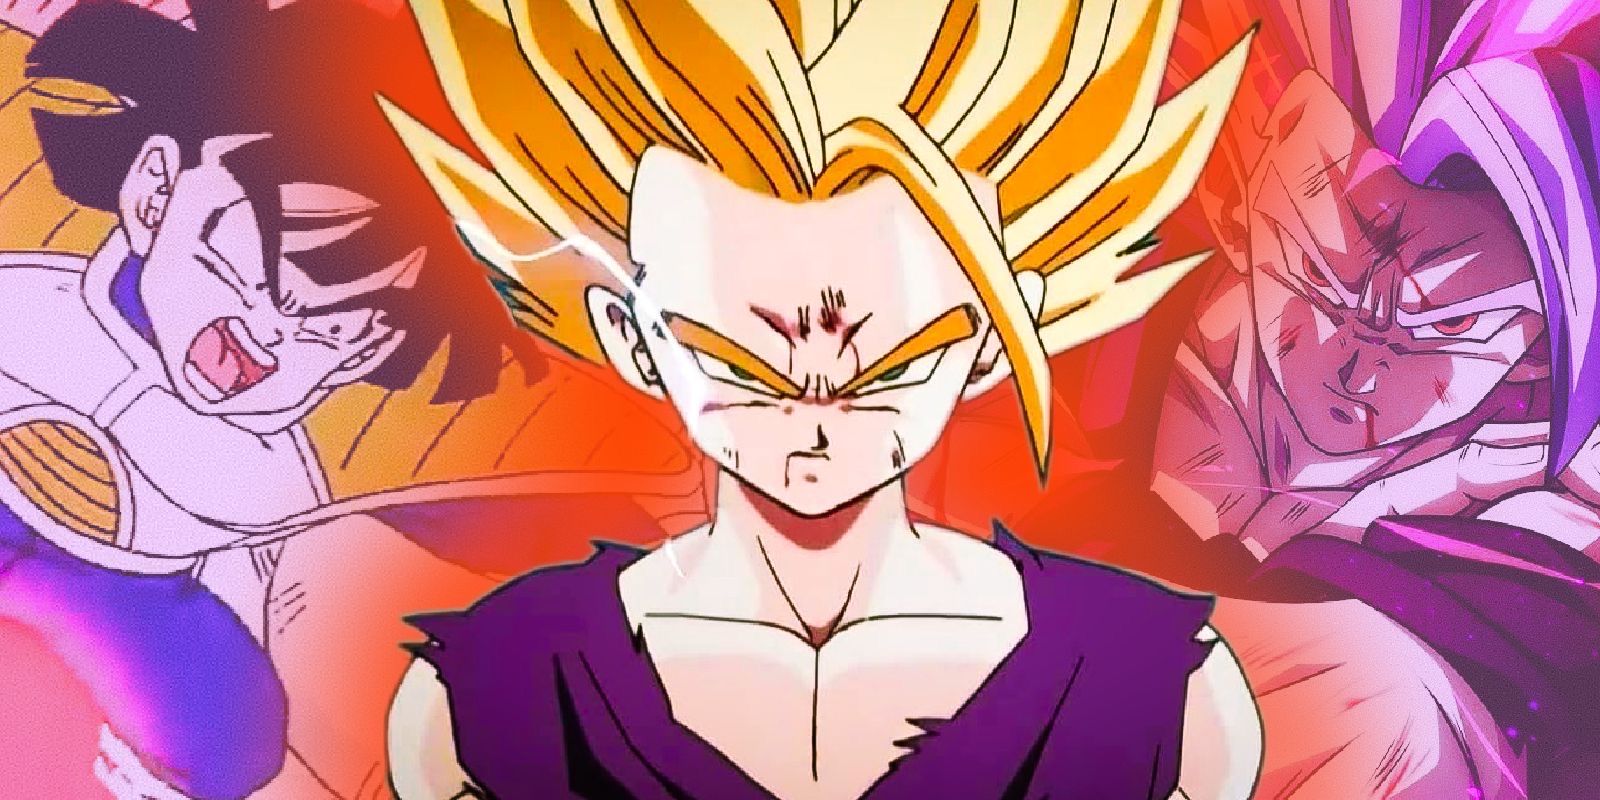 Gohan in his base, super saiyan two, and beast Gohan forms in dbz and super